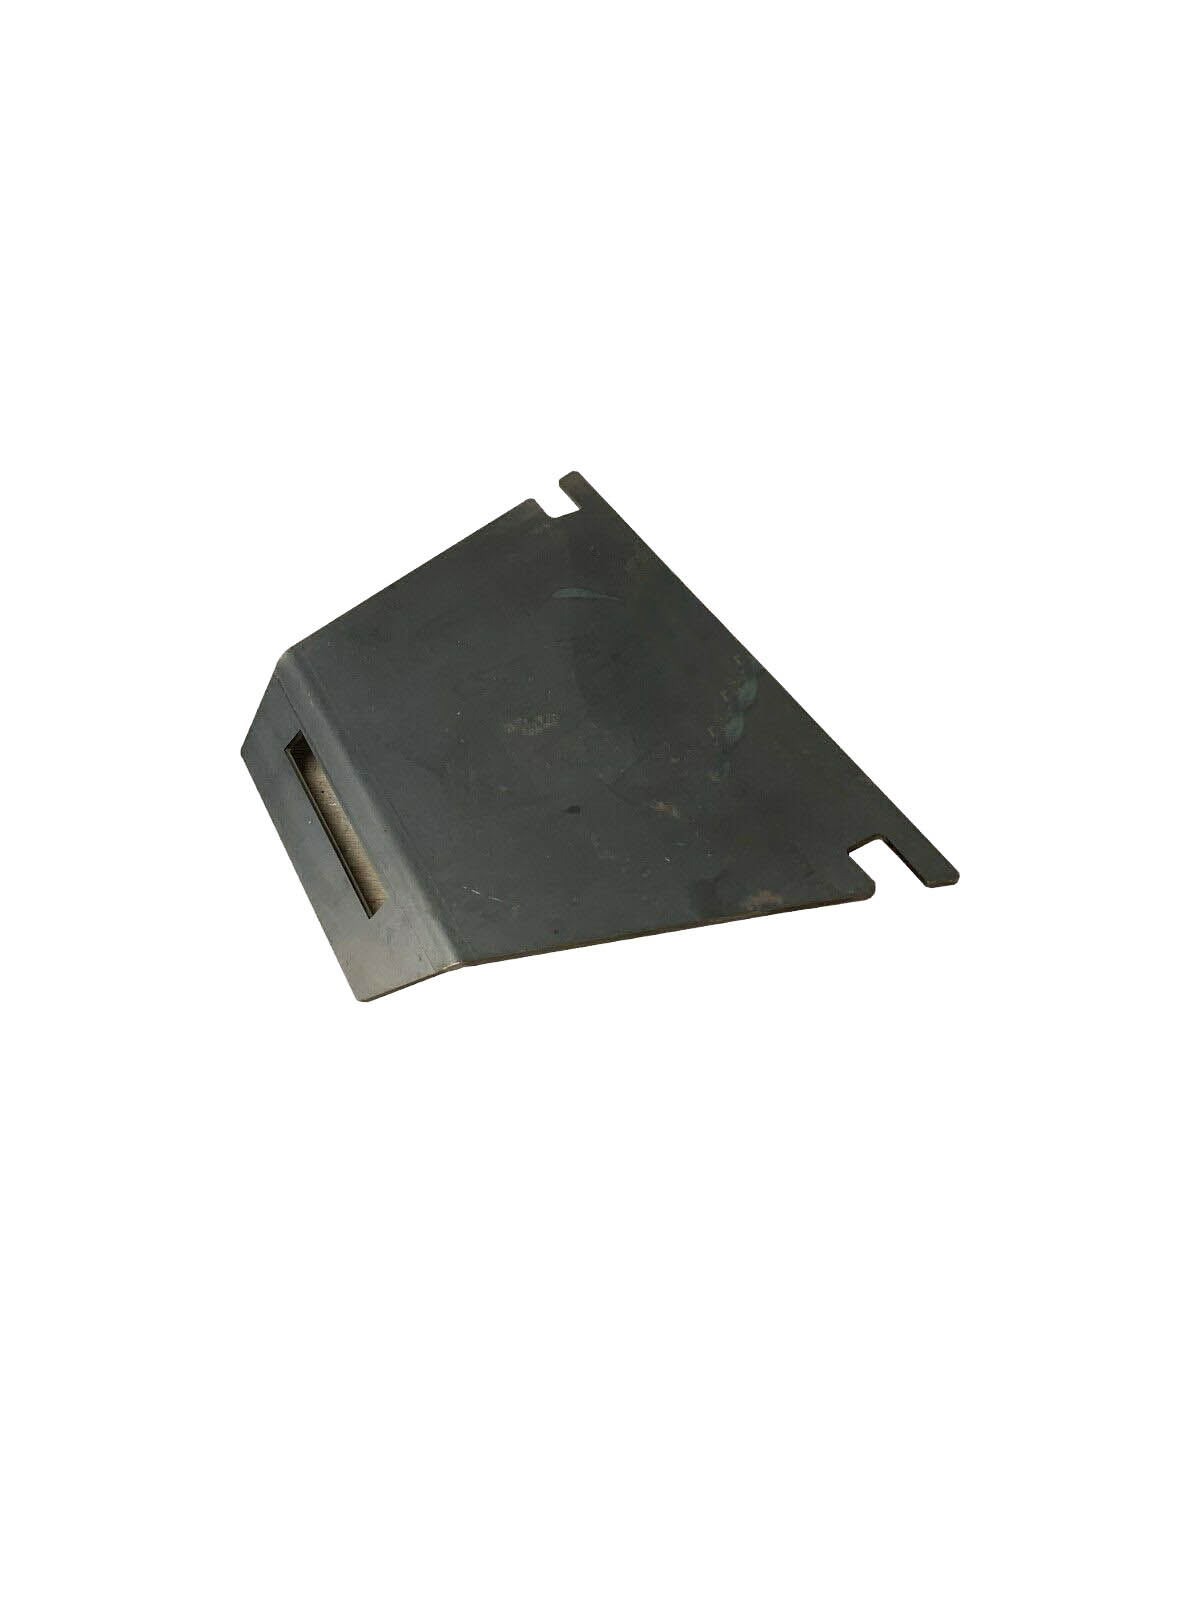 Baffle Plate - FDC Inset Stoves